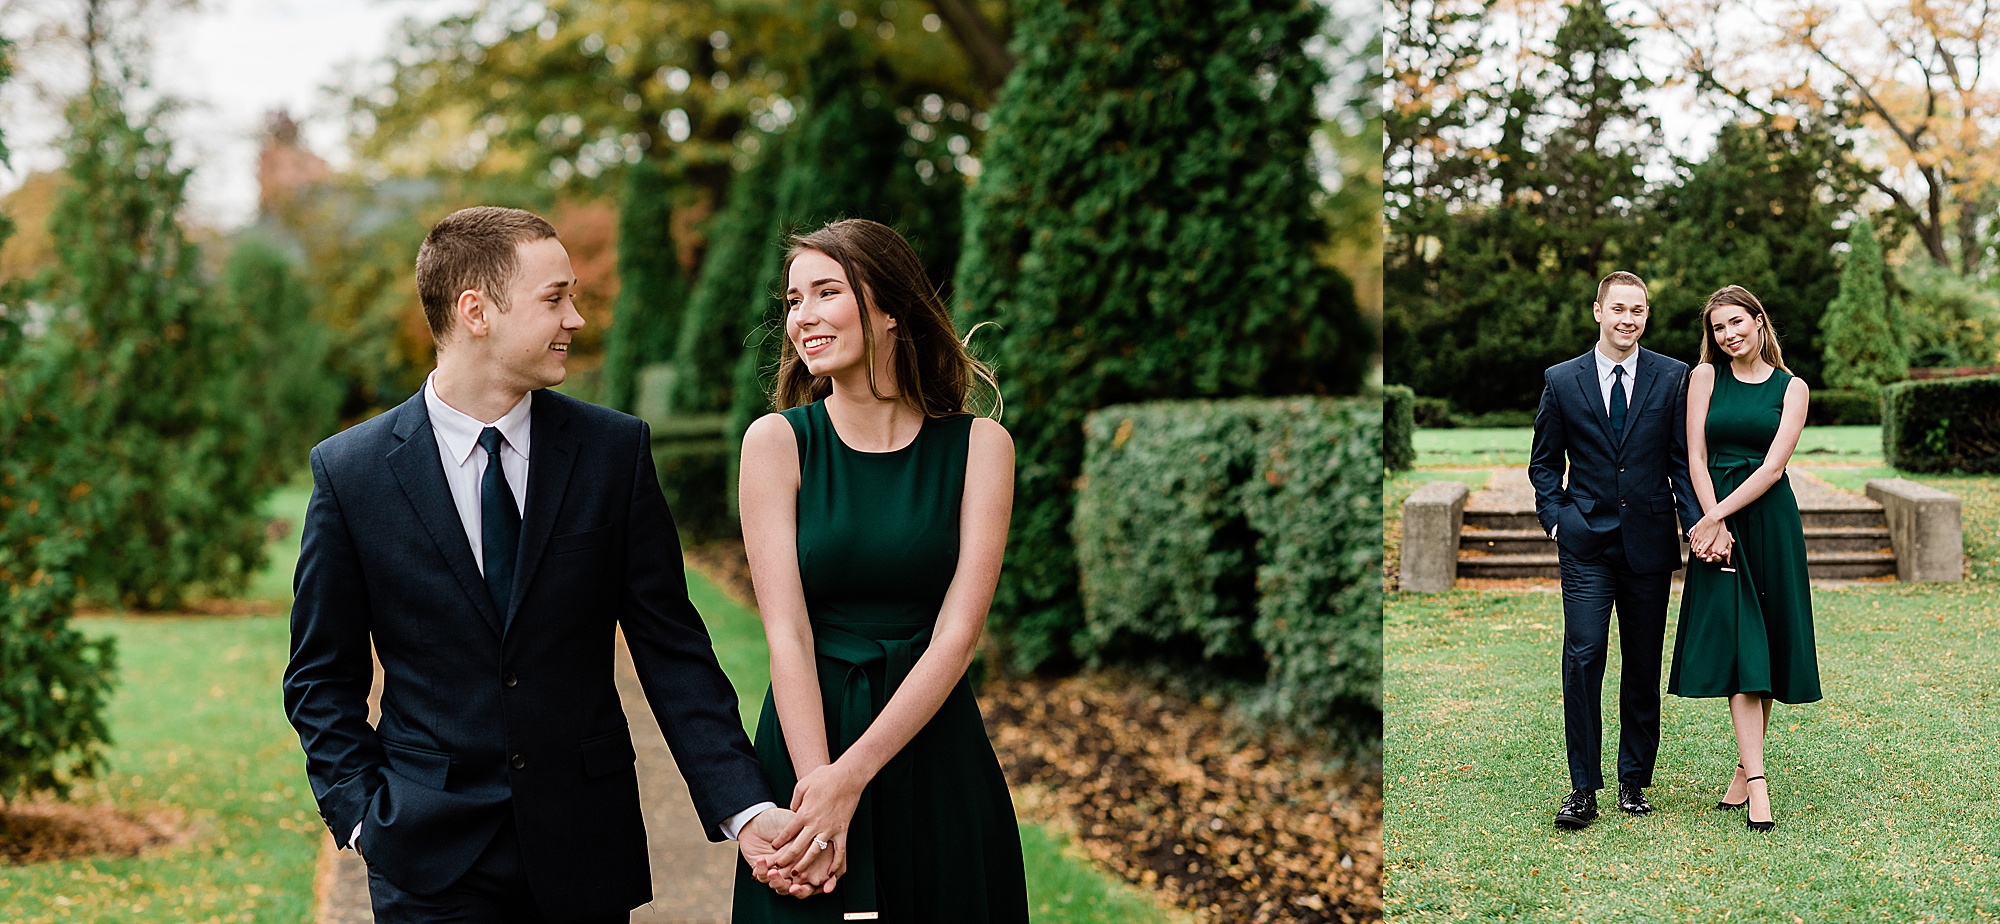 Dressy engagement photos in the Lansing area by Allie Siarto Photography, East Lansing and Pentwater, Michigan wedding and engagement photographers